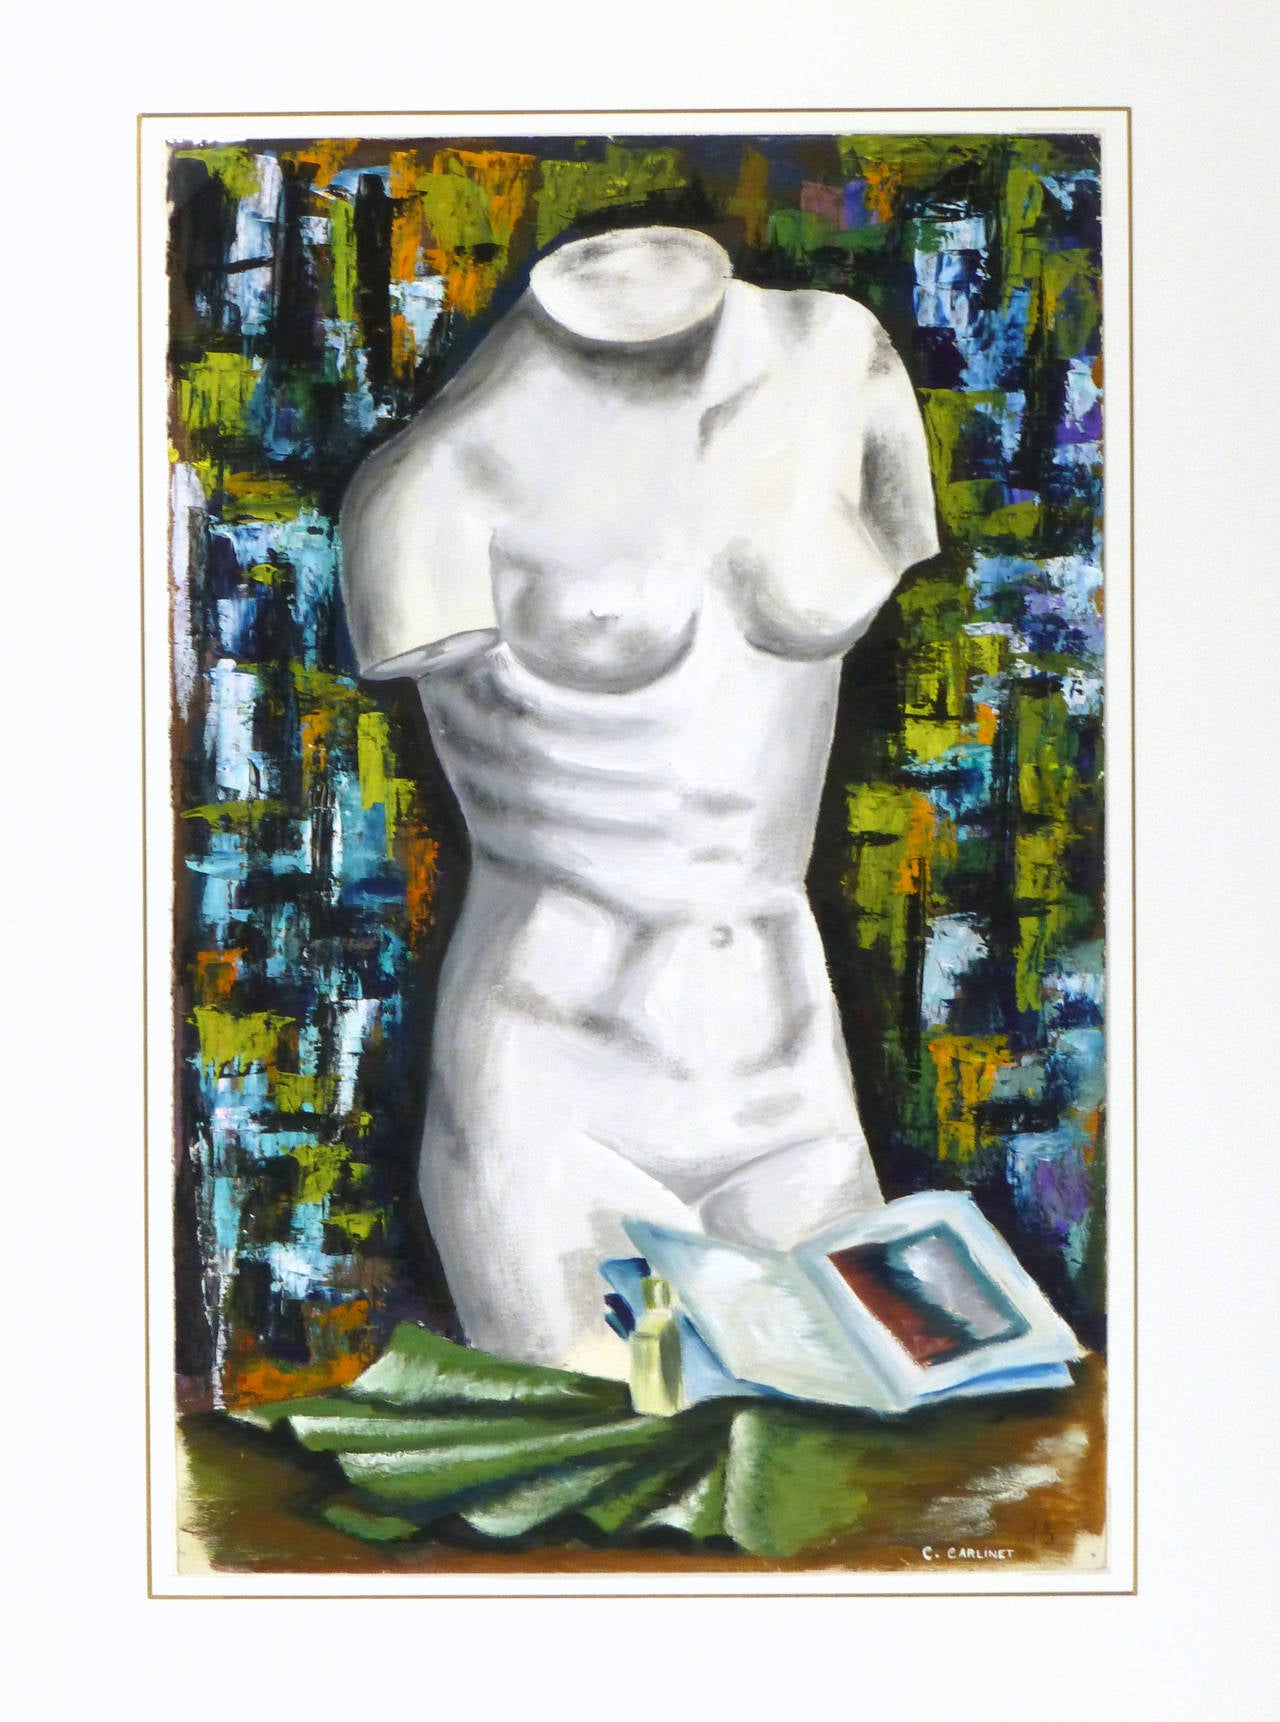 Acrylic painting of a marble female statue by French artist C. Carlinet, circa 1950. An open book and green folded fabric can be seen in the foreground, while abstract patches of color decorate the background. Signed lower right.

Original